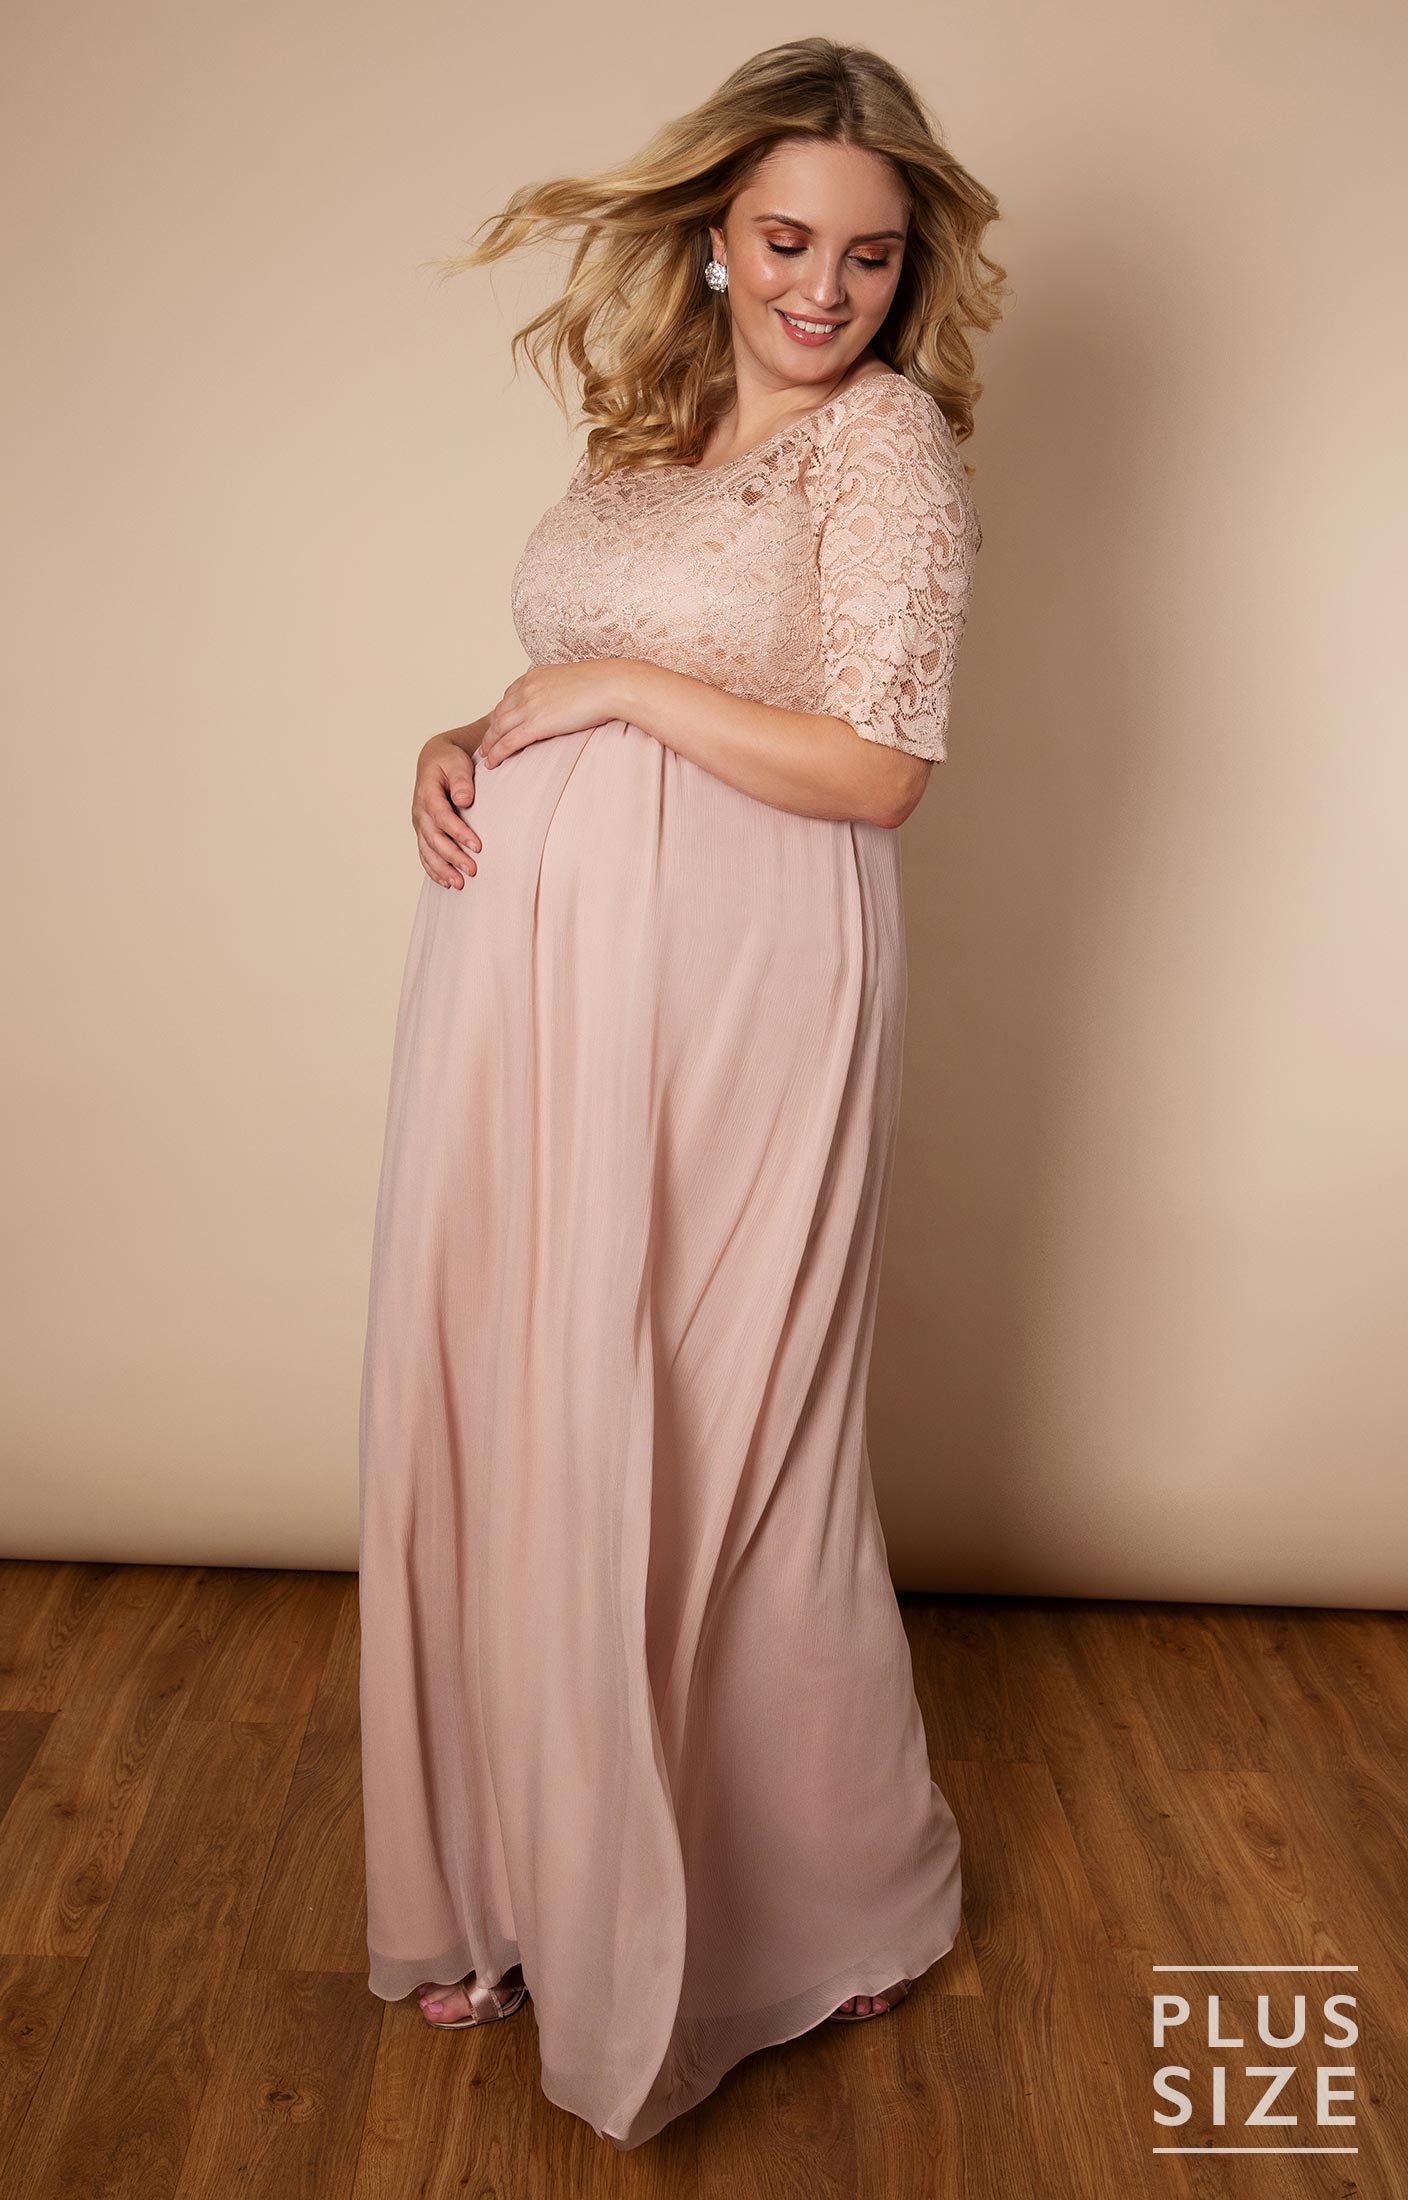 Alaska Plus Size Maternity Chiffon Wedding Gown - Maternity Wedding  Dresses, Evening Wear and Party Clothes by Tiffany Rose